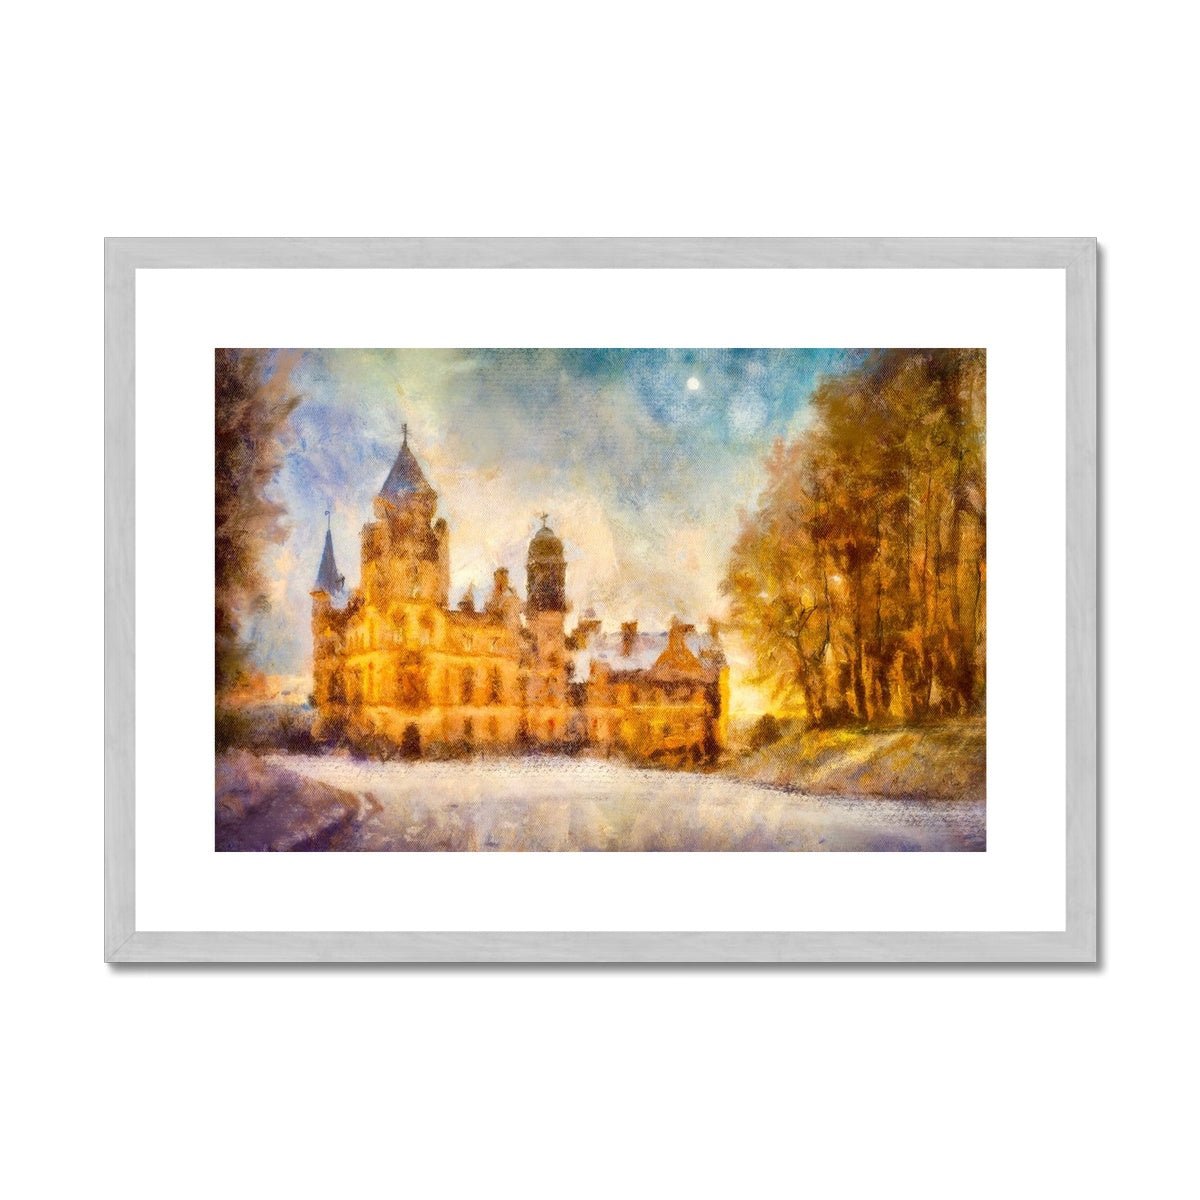 Dunrobin Castle Moonlight Painting | Antique Framed & Mounted Prints From Scotland-Antique Framed & Mounted Prints-Scottish Castles Art Gallery-A2 Landscape-Silver Frame-Paintings, Prints, Homeware, Art Gifts From Scotland By Scottish Artist Kevin Hunter